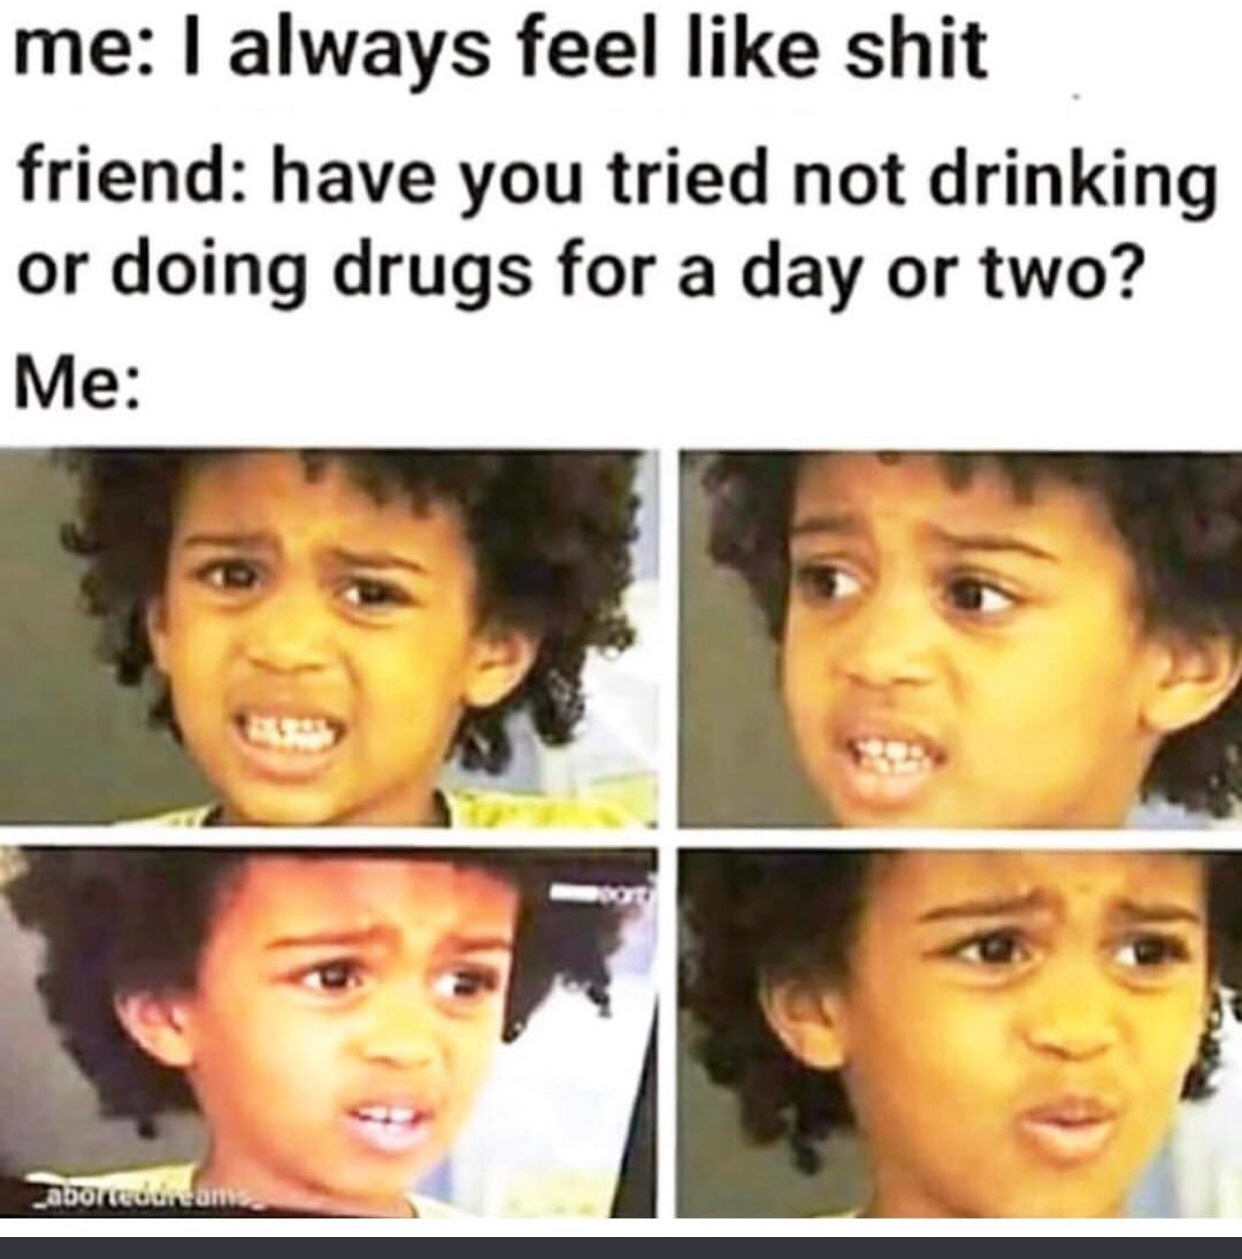 funny meme of sick feel like garbage - me I always feel shit friend have you tried not drinking or doing drugs for a day or two? Me abortedunanis.